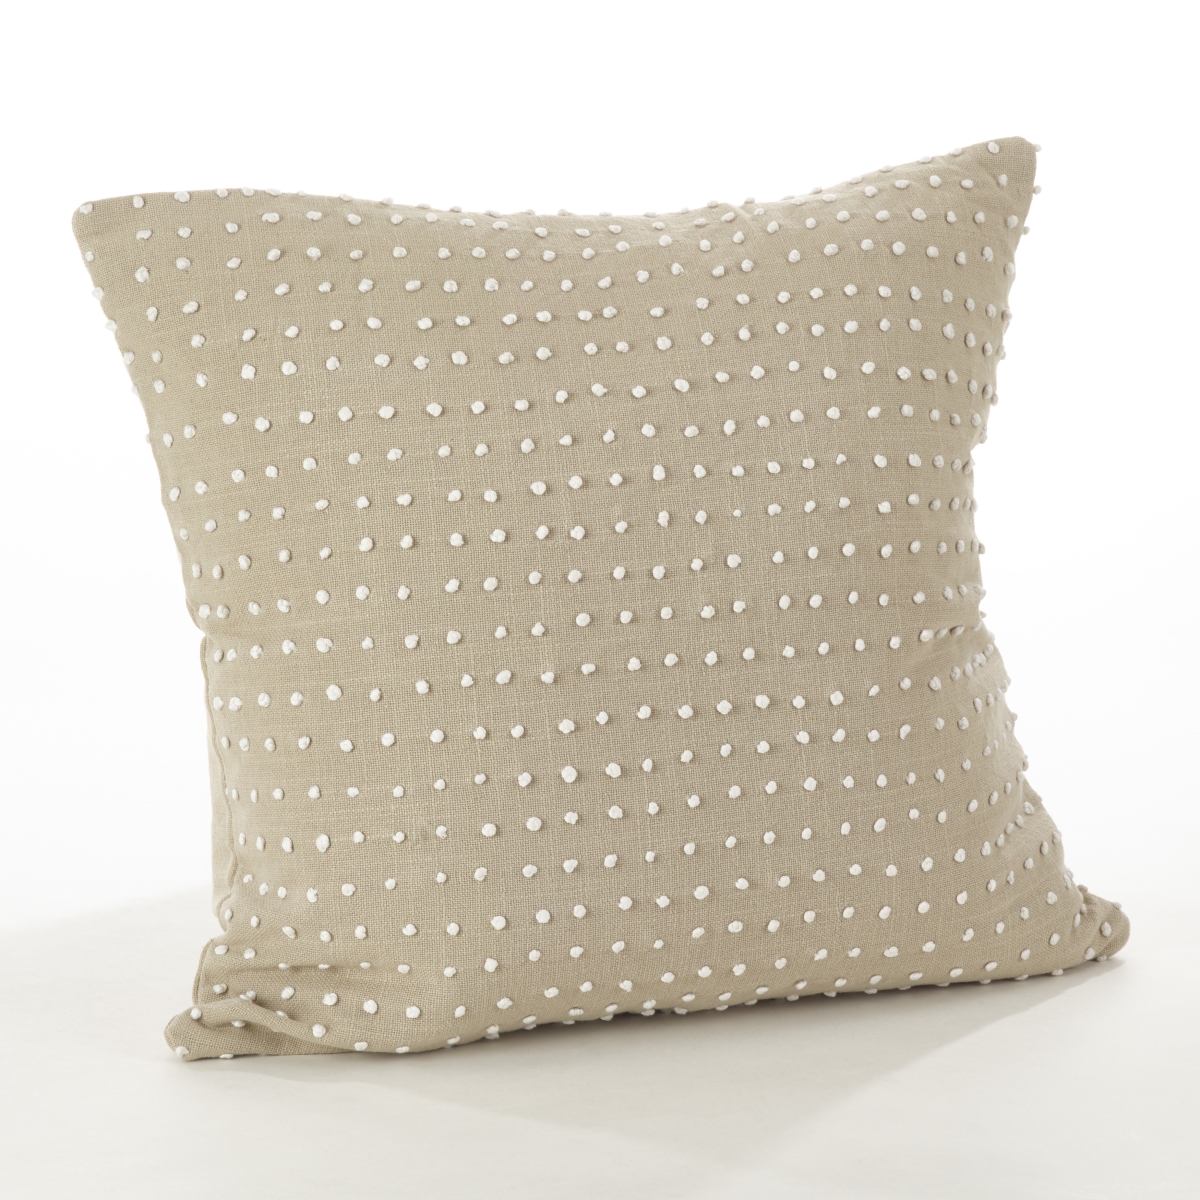 0006.n20s 20 In. French Knot Design Down Filled Cotton Throw Pillow, Natural